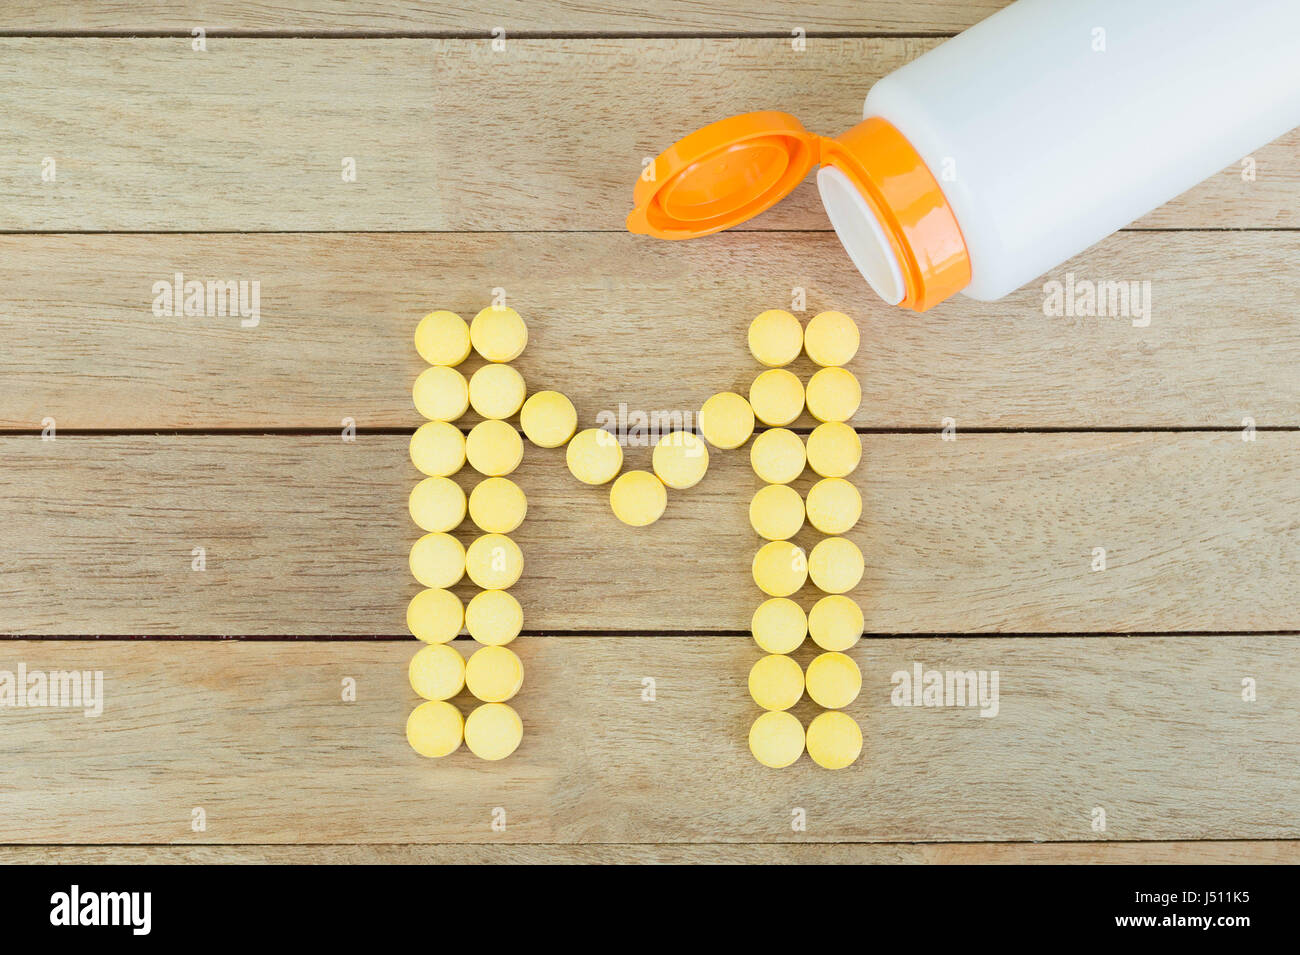 Yellow pills forming shape to M alphabet on wood background Stock Photo